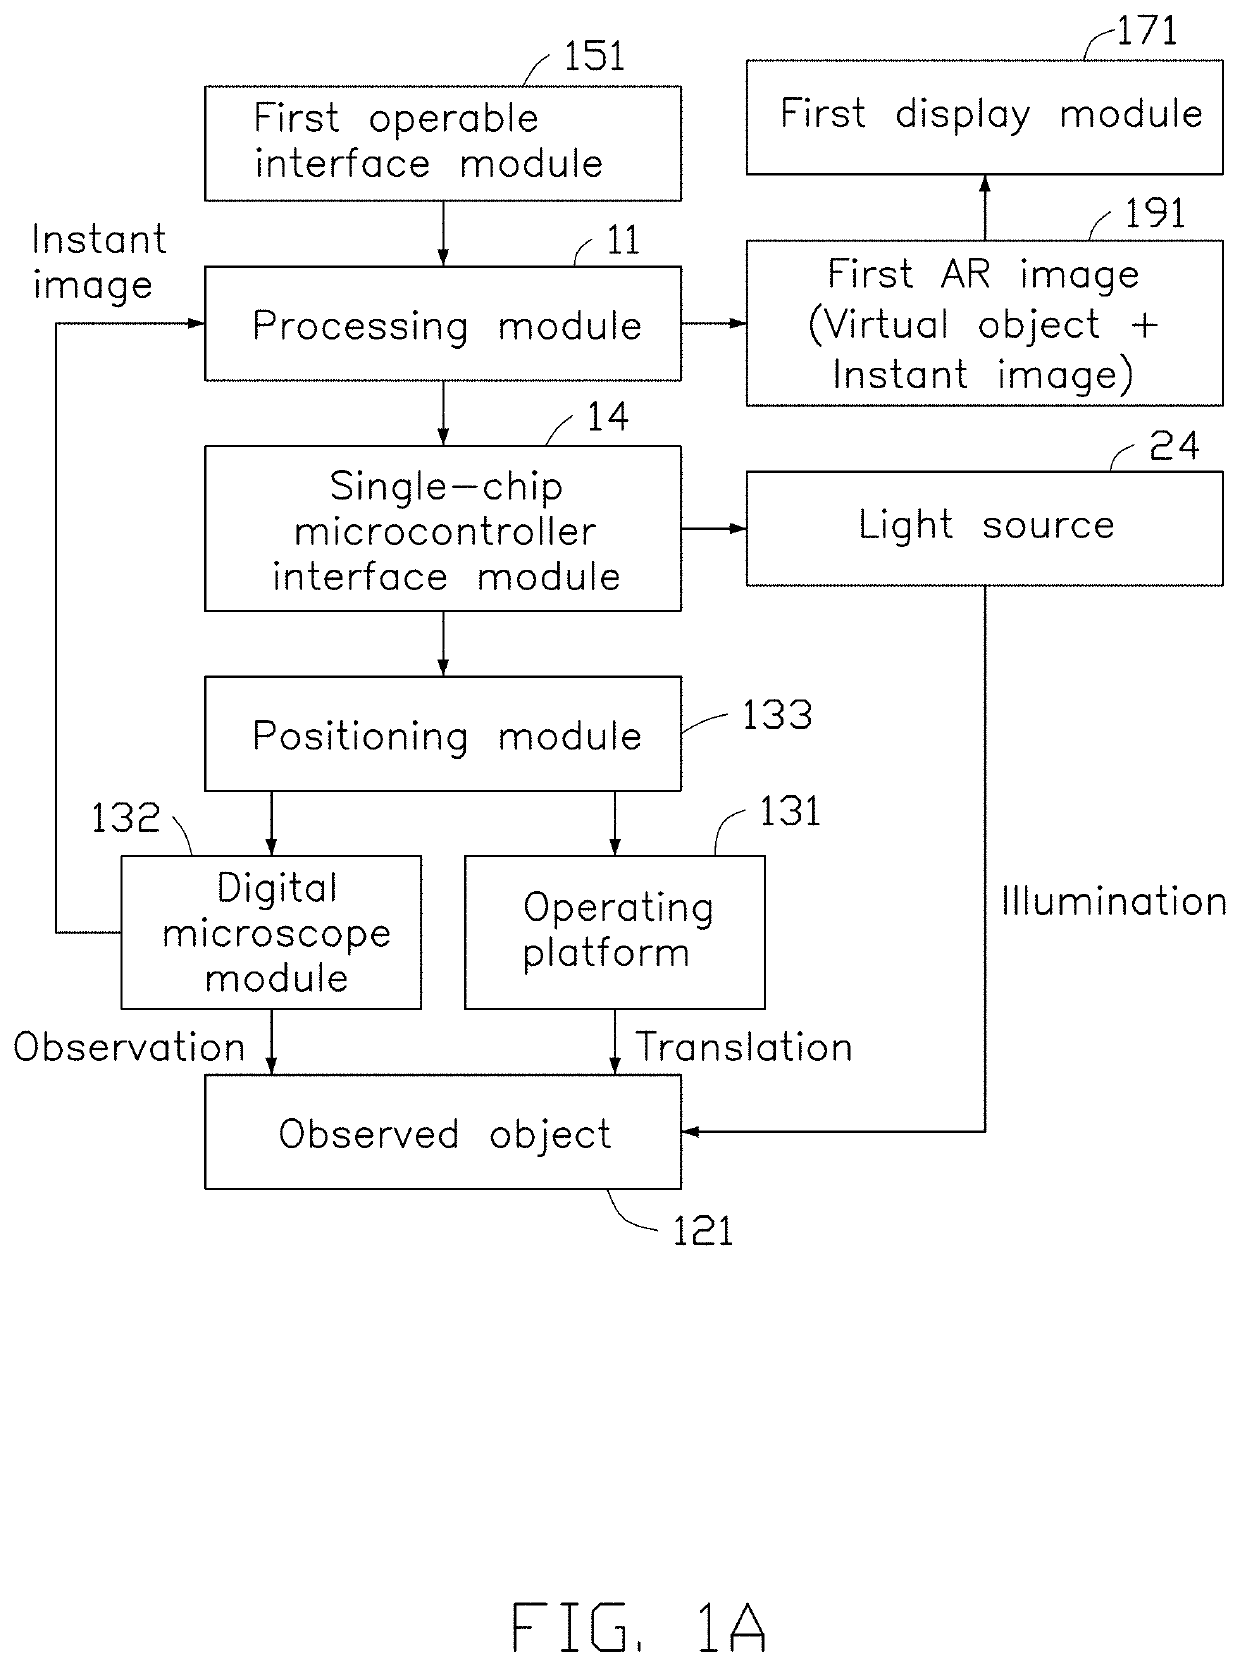 Systems and applications for generating augmented reality images